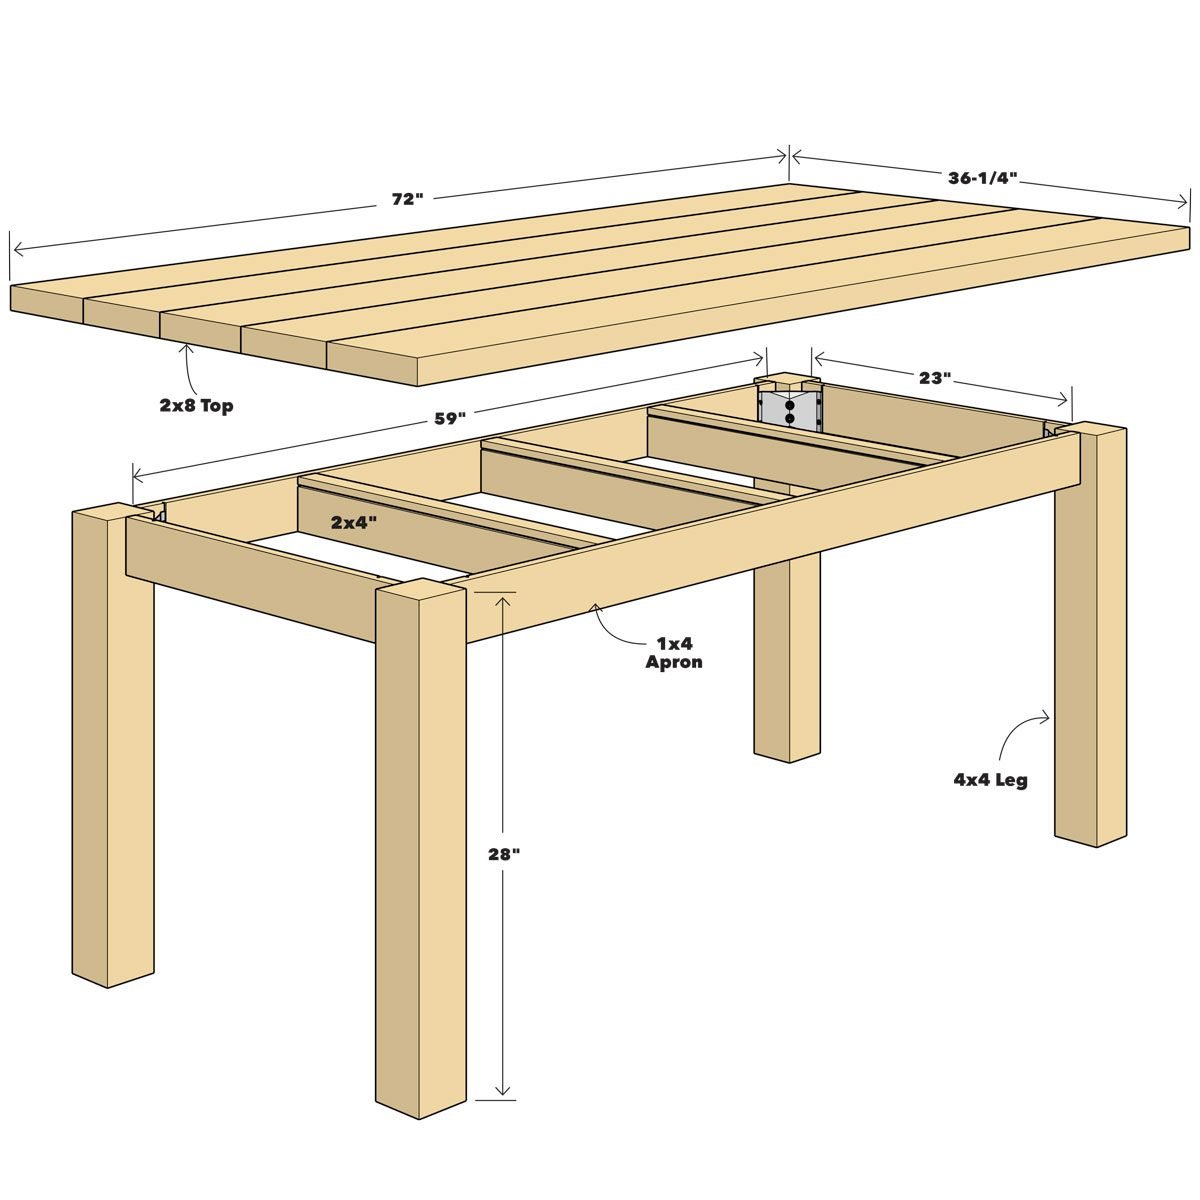 Woodworking table Main Image